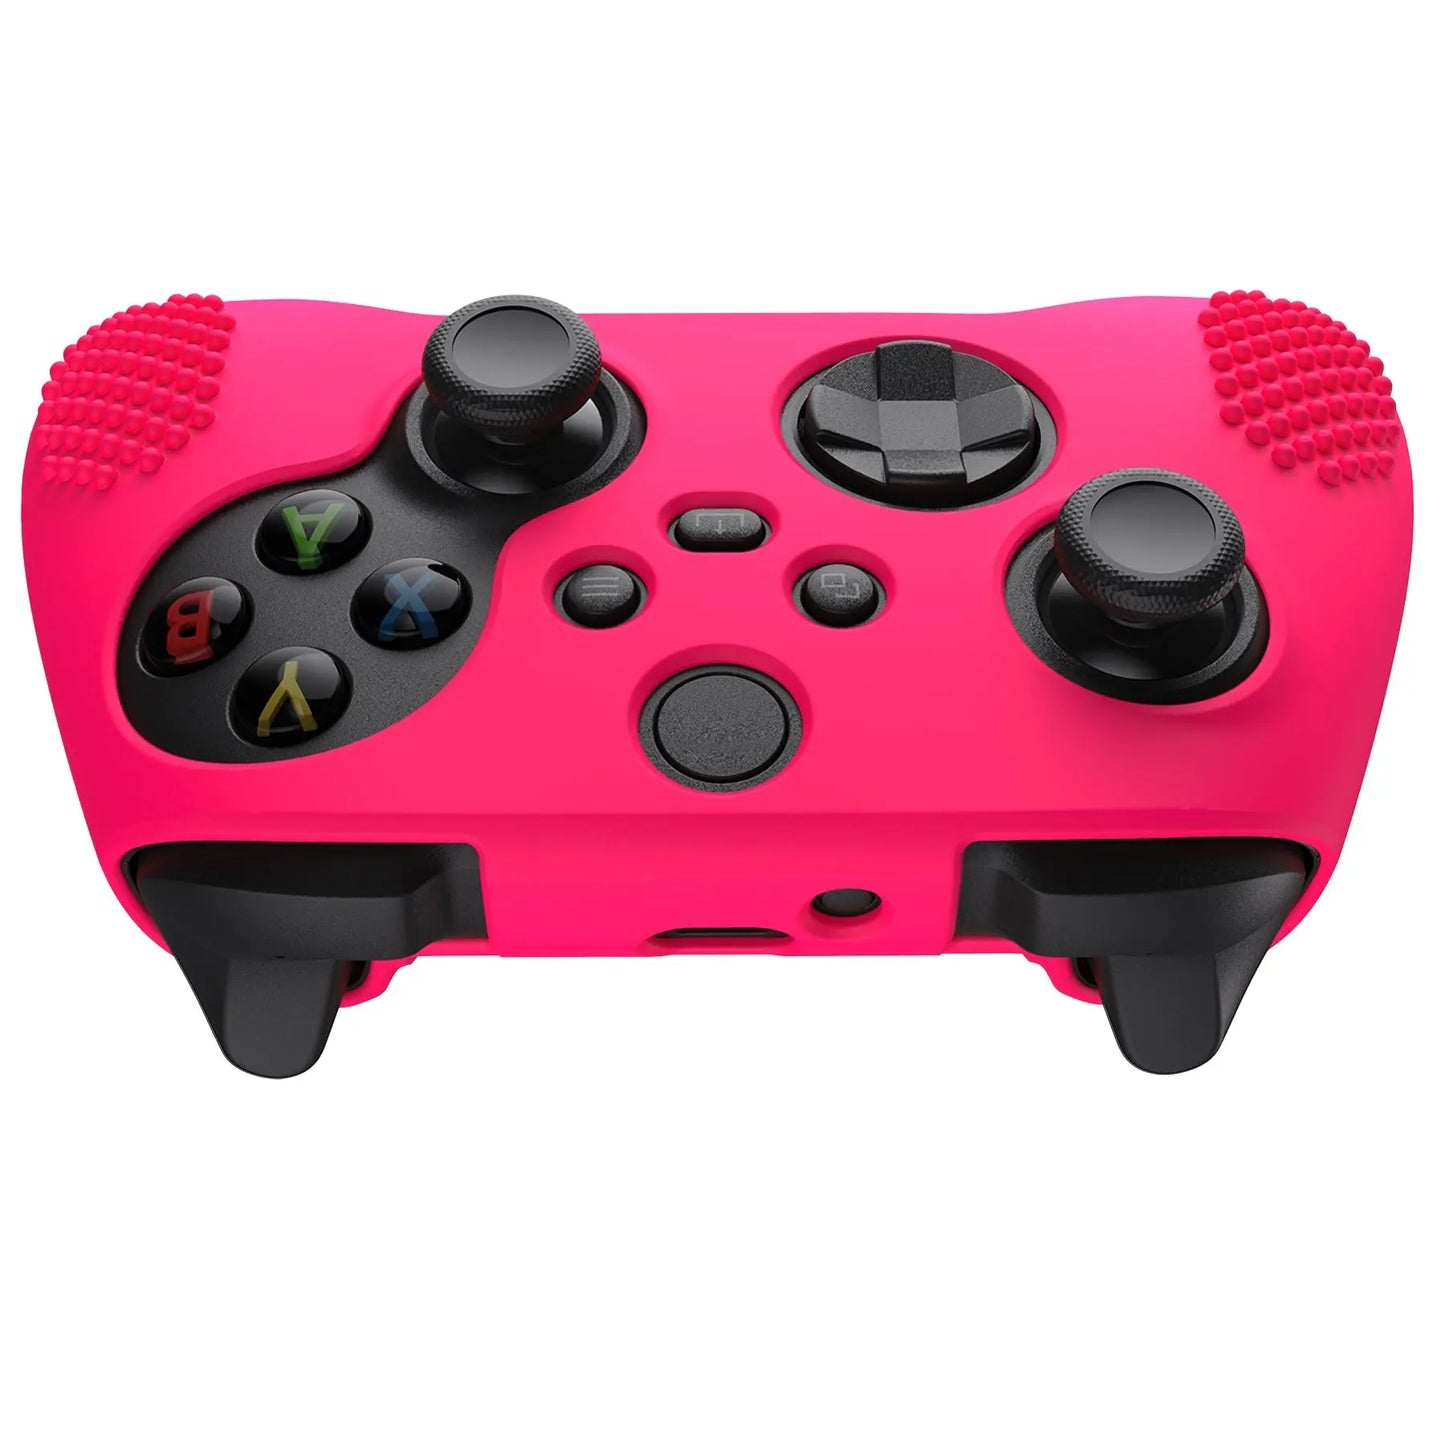 PlayVital Bright Pink 3D Studded Edition Anti-slip Silicone Cover Skin for Xbox Series X Controller, Soft Rubber Case Protector for Xbox Series S Controller with 6 Black Thumb Grip Caps - SDX3019 PlayVital